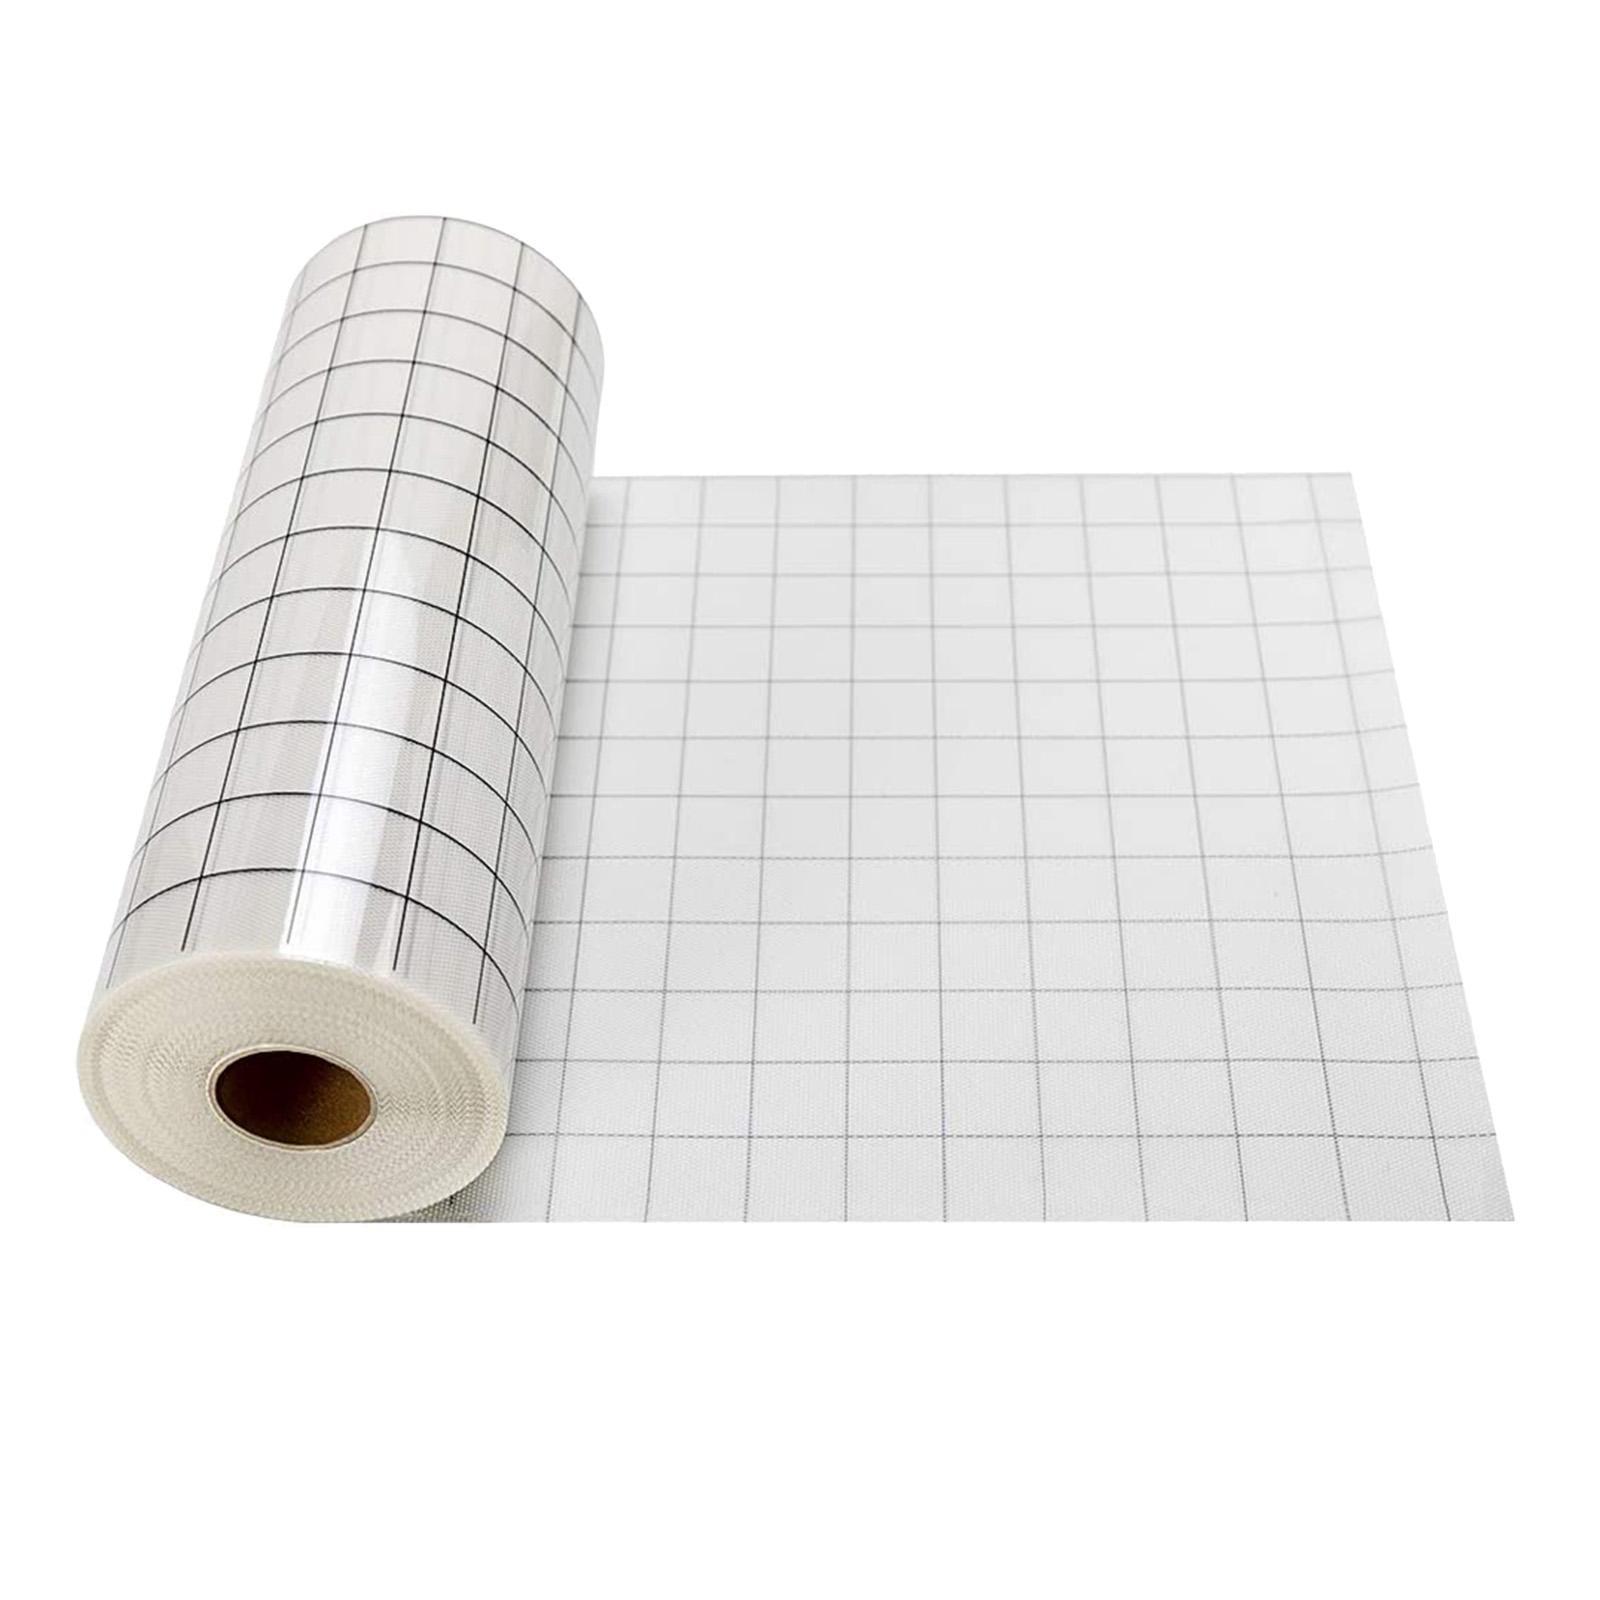 2x Vinyl Transfer Paper Tape for  Glue 12 X 60 '' Clear Alignment Grid